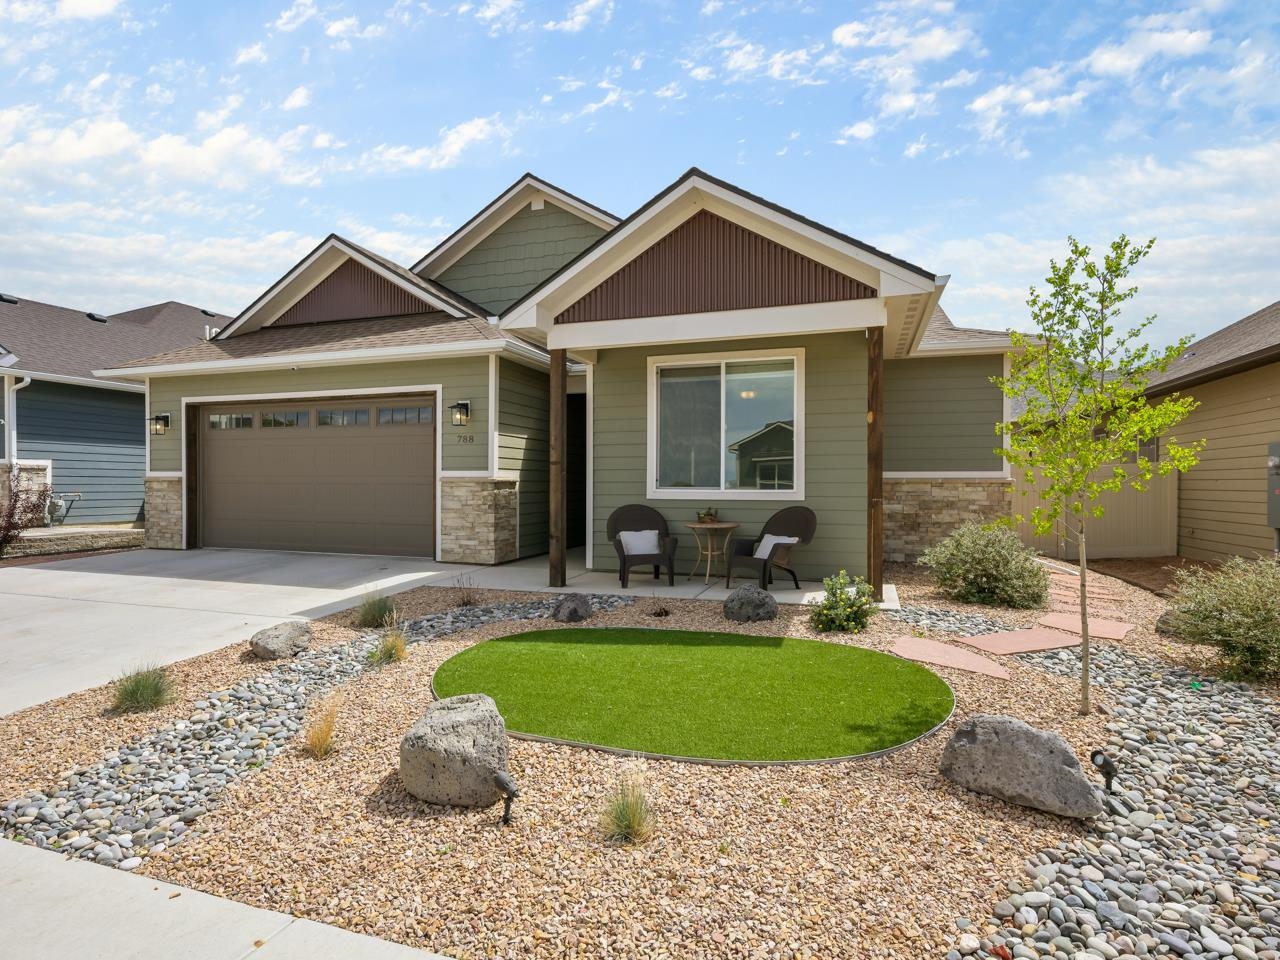 Welcome to this beautiful home nestled in the Silver Spur neighborhood of Northwest Grand Junction, Colorado. This immaculate residence offers the perfect blend of peace, comfort, and convenience, situated in a subdivision mere minutes from the amenities of town. This home is within proximity to schools, shopping destinations, and the recreation of Canyon View Park. Embrace a lifestyle of leisure and exploration without sacrificing the comforts of suburban living. Step through the inviting entryway and be greeted by the warmth and sophistication of the interior. Effortless flow guides you through the main living spaces, including a convenient laundry area and additional bedrooms. At the heart of the home lies the large open-concept living area, adorned with vaulted ceilings and the natural light streams through sizable windows. The adjacent kitchen features sleek solid countertops, a walk-in pantry, and newer stainless steel appliances, including a gas range, built-in microwave, and dishwasher. Illuminated by stylish light fixtures, the kitchen island breakfast bar invites casual dining and entertaining. Adjacent to the kitchen, discover a charming informal dining area with seamless access to the back patio. Two additional bedrooms, thoughtfully positioned towards the front of the home, offer versatility and comfort, complemented by a shared four piece bathroom with dual sinks, granite countertops, and elegant light fixtures. You will fall in love with the primary suite, flooded by natural light and offering the perfect retreat for relaxation. Enjoy the convenience of a spacious walk-in closet outfitted with ample shelving and storage, with the added convenience of a laundry area just steps away. Indulge in the en-suite bathroom, featuring a grand walk-in shower adorned with exquisite tile backsplash, dual sinks atop granite countertops, and a cozy relaxing ambiance. Outside, the covered patio provides an excellent space for enjoying the surroundings, with the option of unfurling screens for enhanced comfort and shade. The xeriscaped landscaping ensures effortless maintenance. Additional peace of mind is provided by the home's built-in security system. Don't miss this opportunity to make this exceptional residence your own. Schedule a showing today!